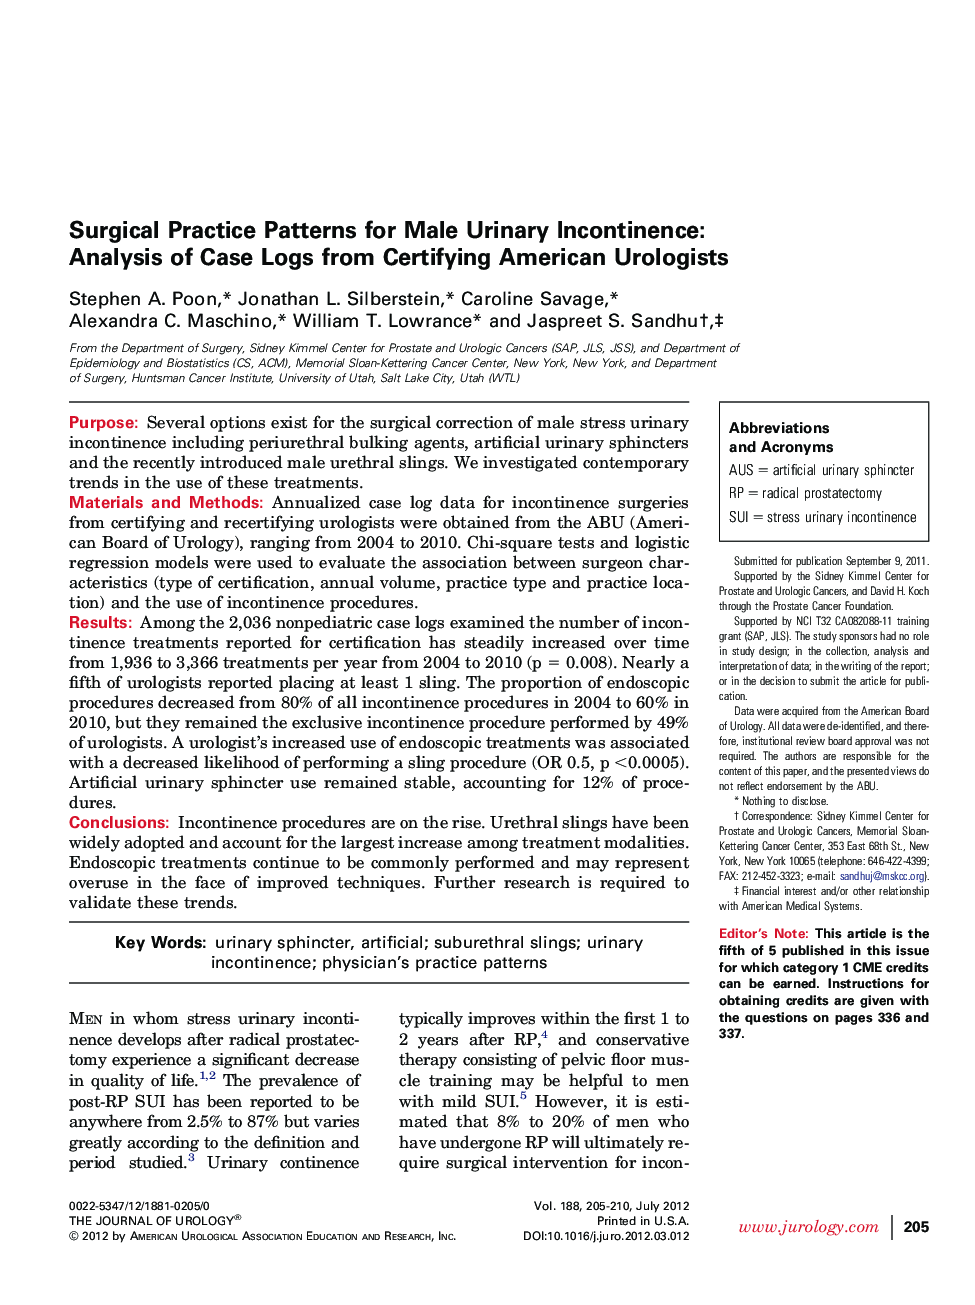 Surgical Practice Patterns for Male Urinary Incontinence: Analysis of Case Logs from Certifying American Urologists 